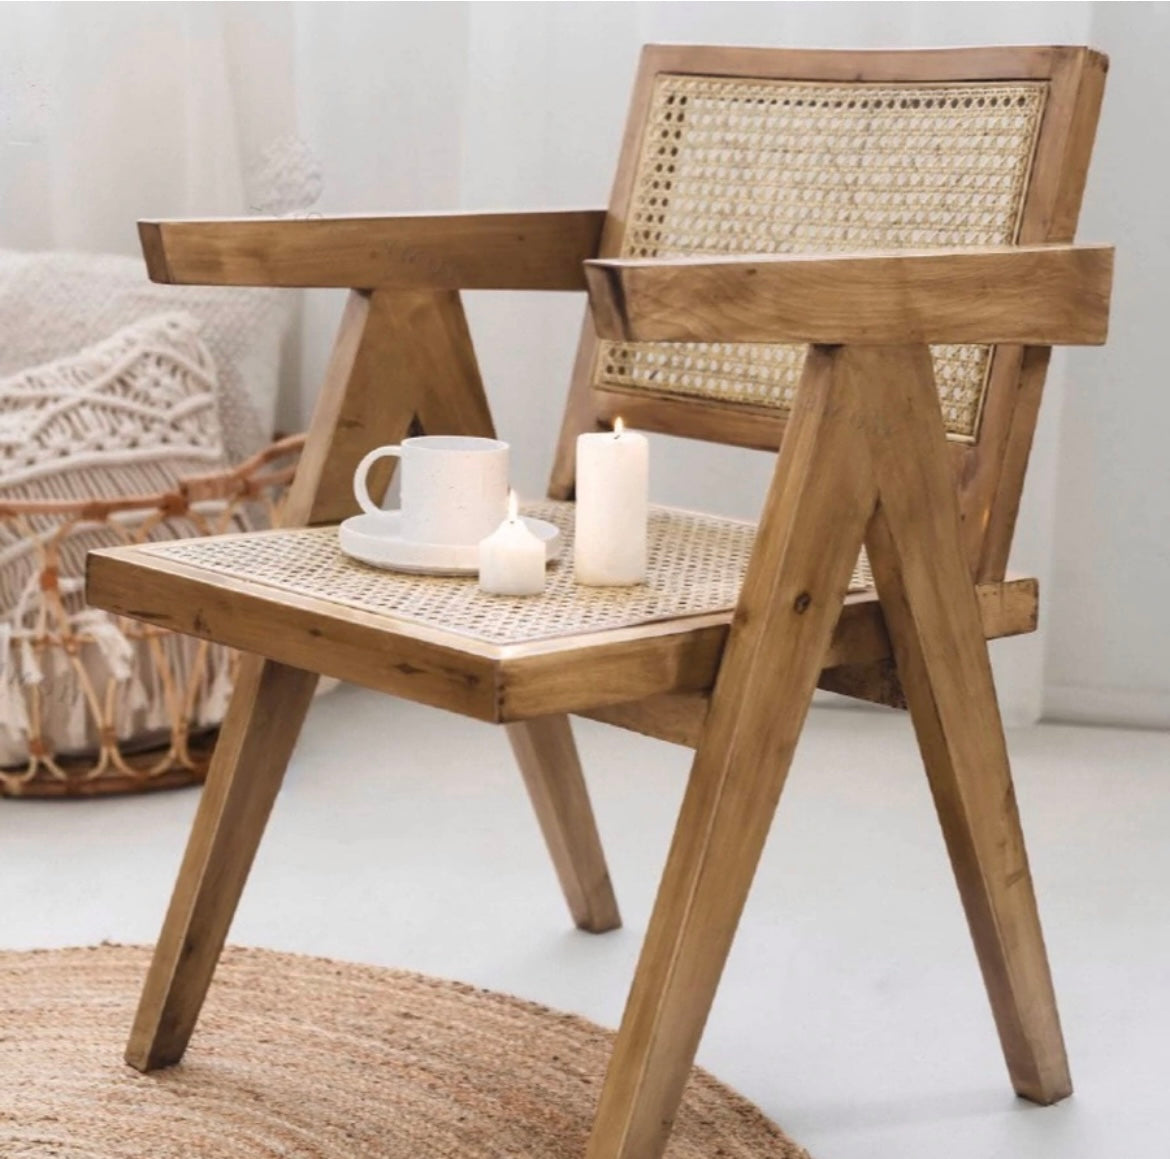 Ace Rattan Dining Chair